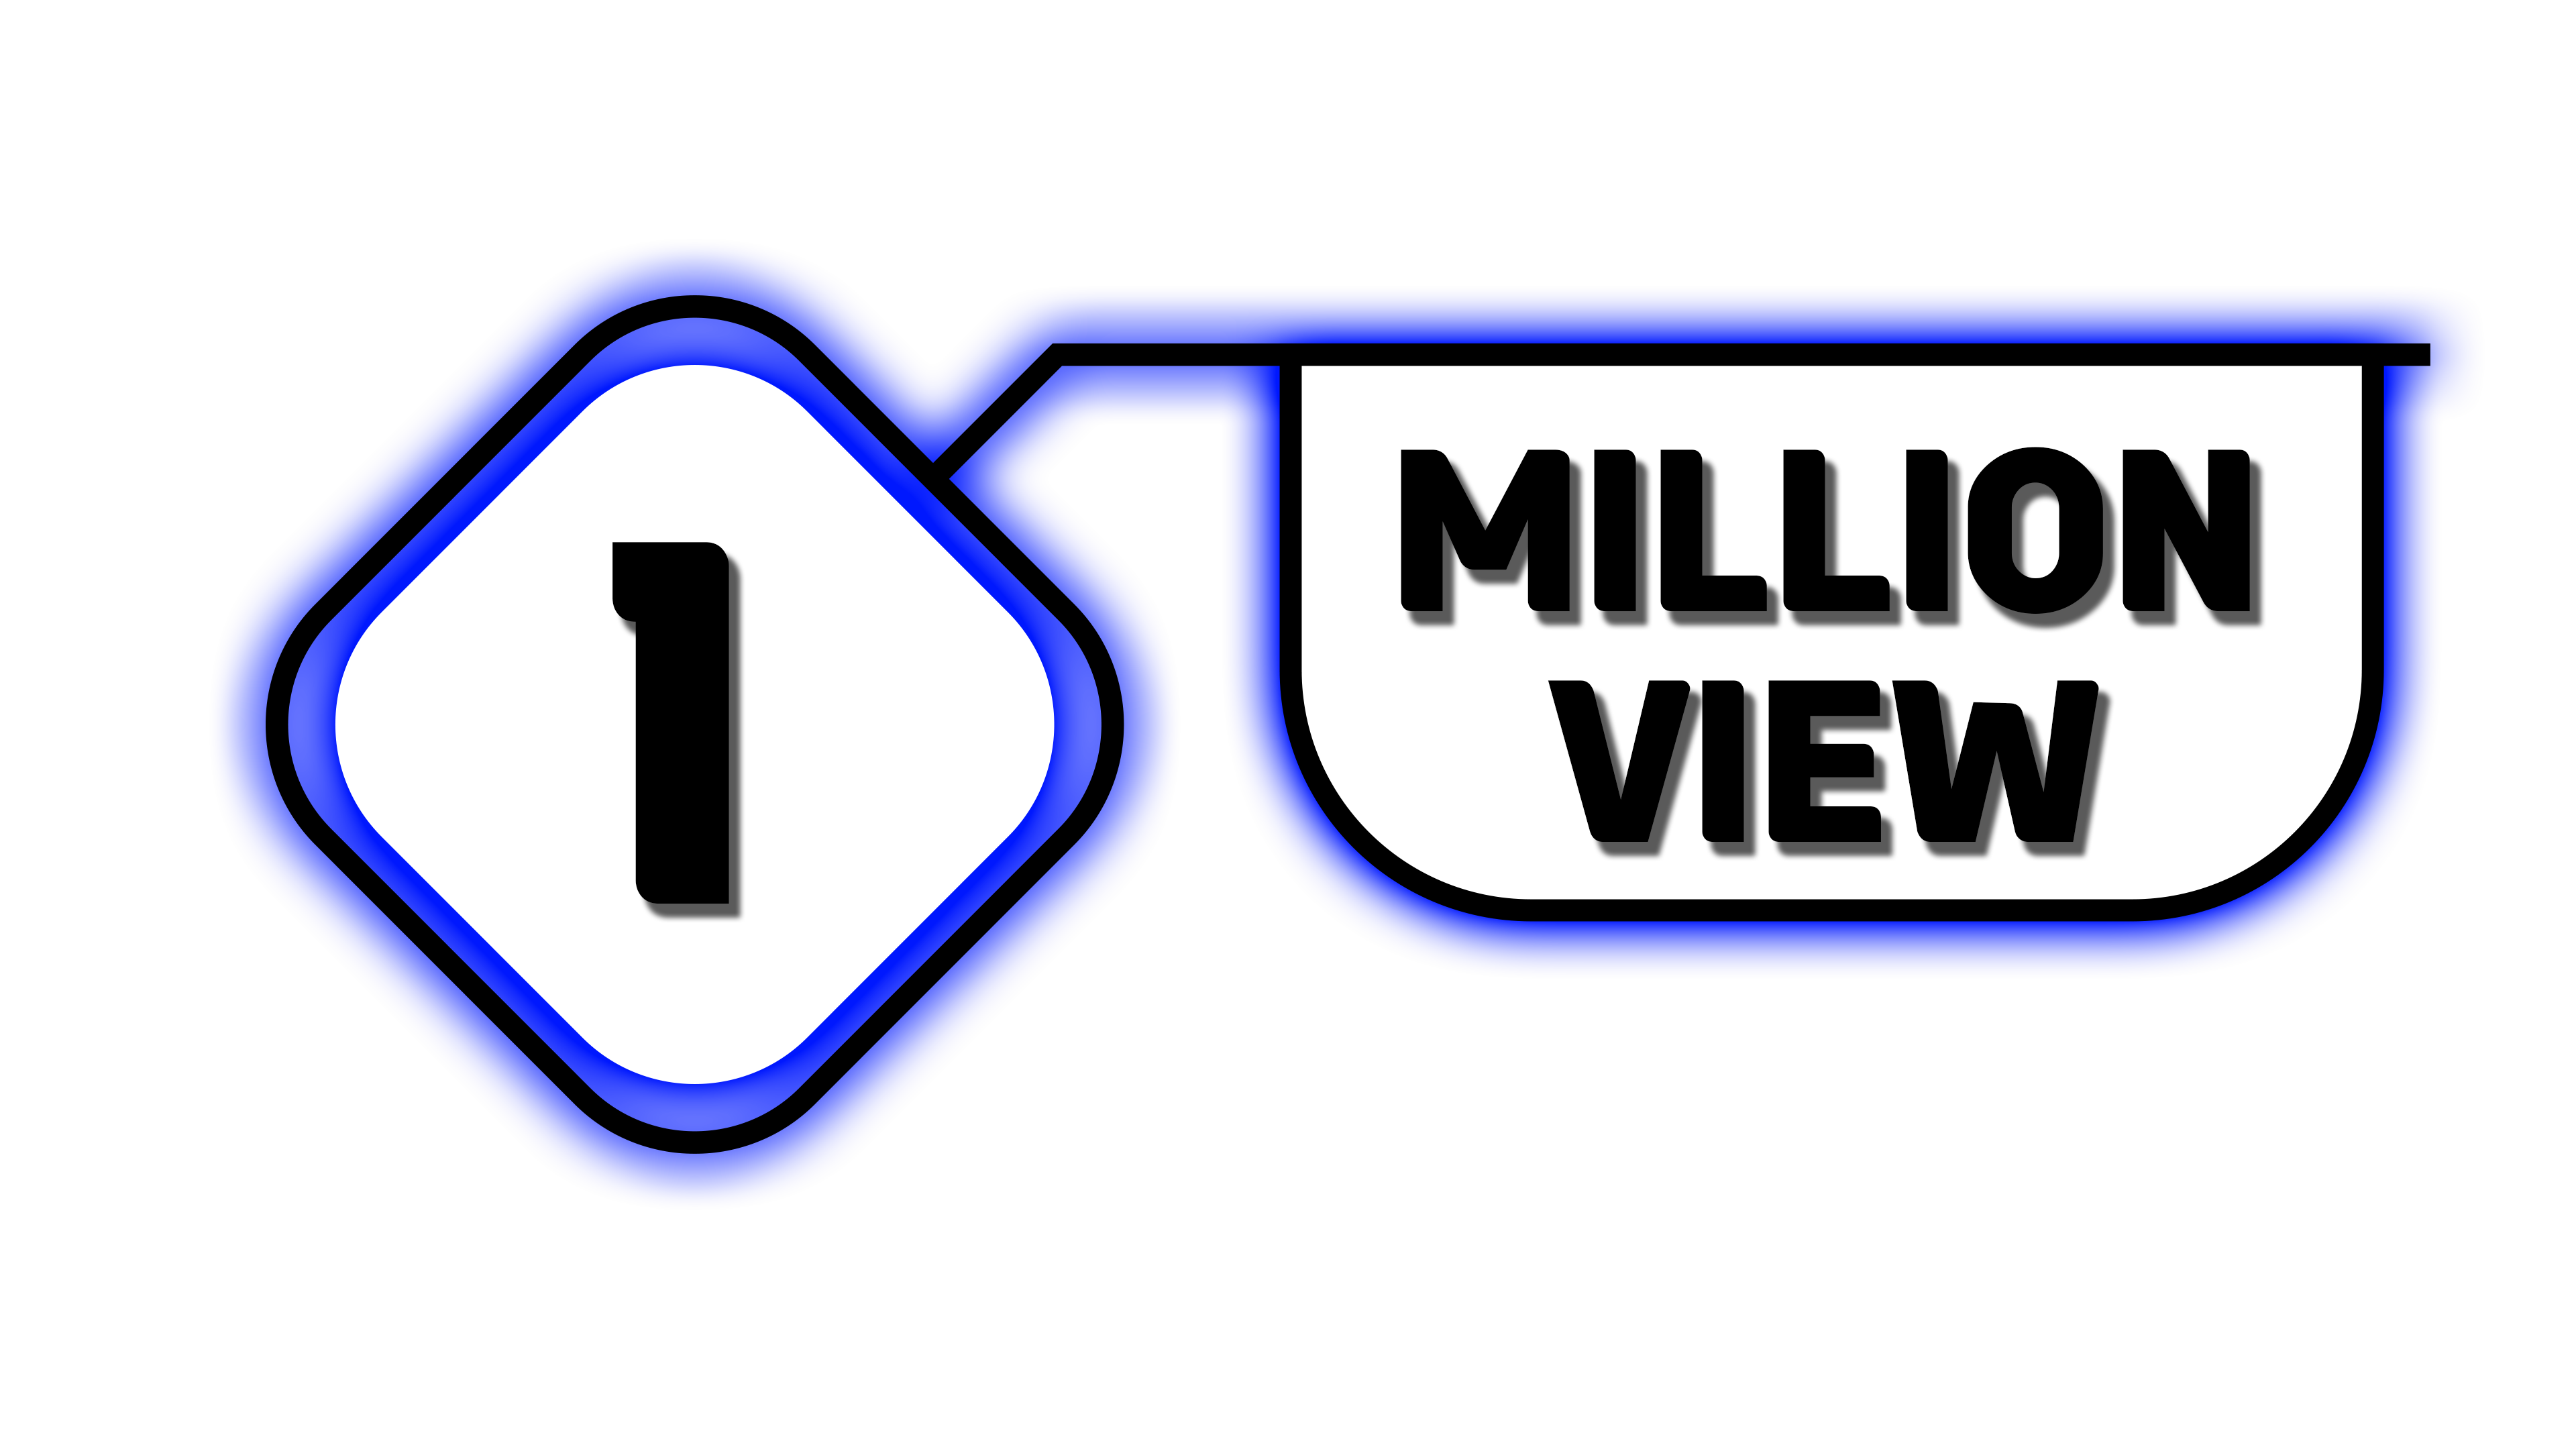 1 Million Clipart Hd PNG, Youtbe 1 Million Views Thumbnail Origami Banner,  Youtube, Thumbnail, Views PNG Image For Free Download | Clip art, Banner,  Origami